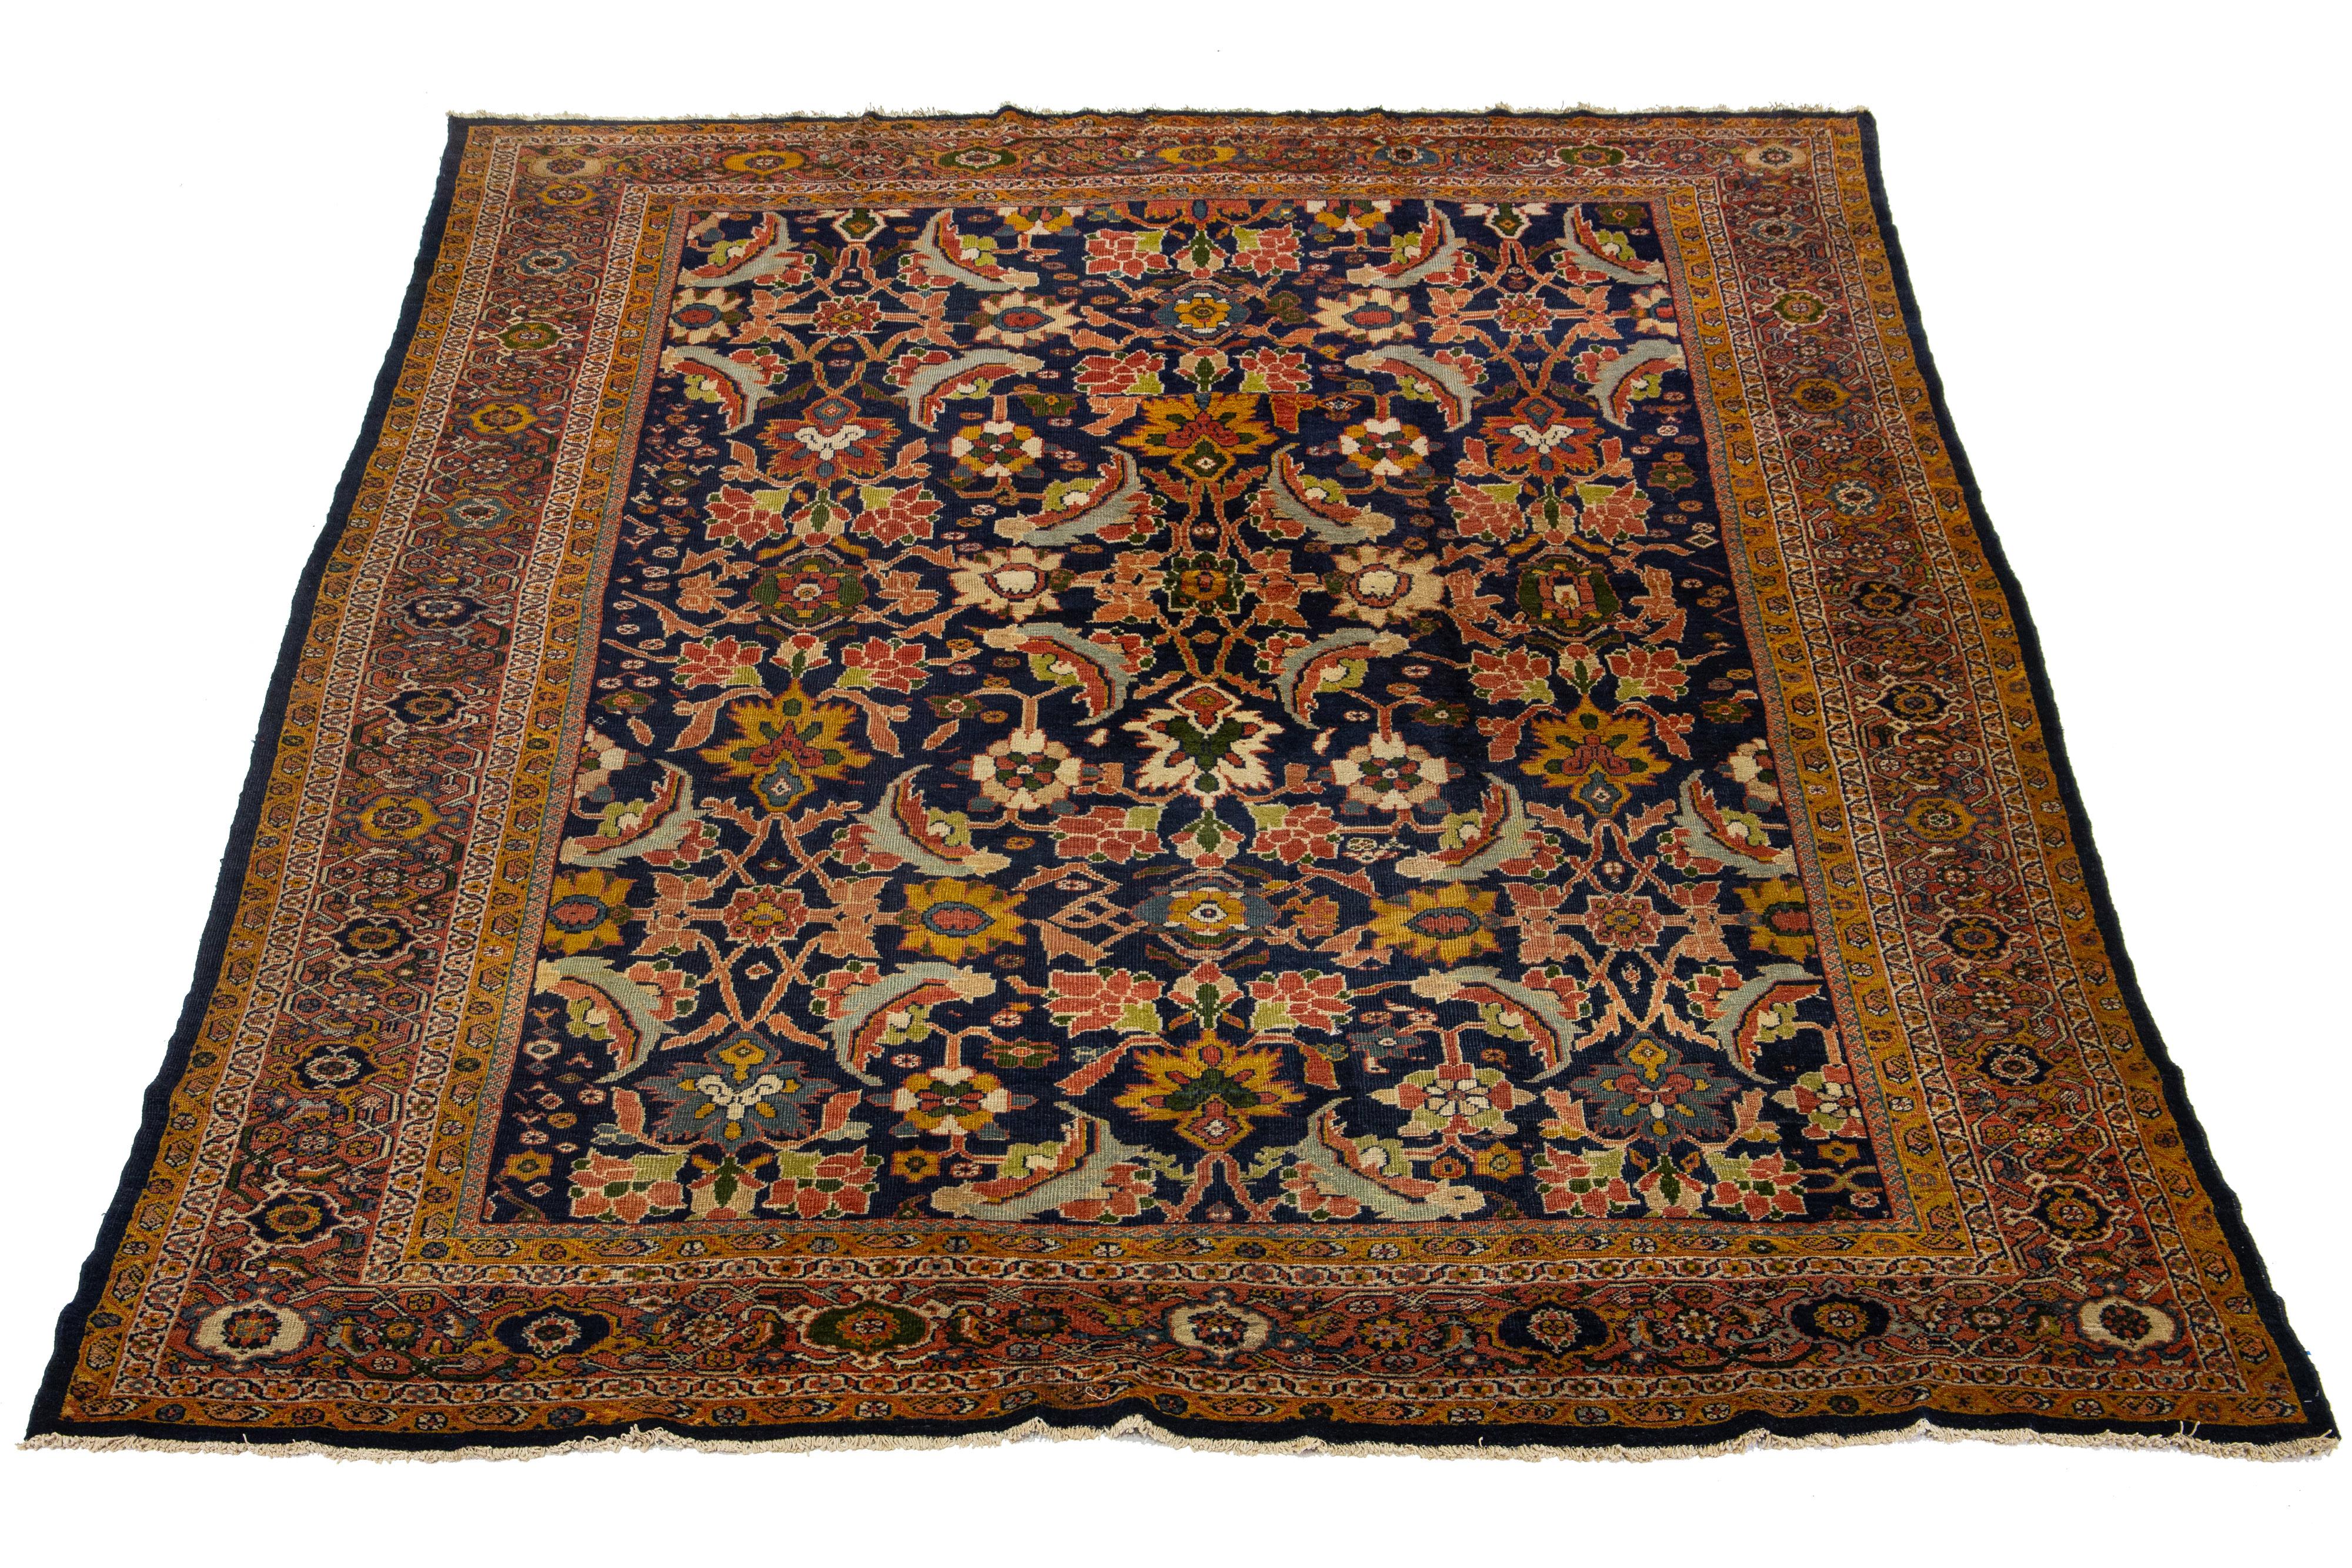 This antique Sultanabad wool rug from the 1880s is a stunning hand-knotted piece with a blue field. It displays multicolored accents in a floral design. The enduring quality of this classic rug design is emphasized by its strong wool weave, which is